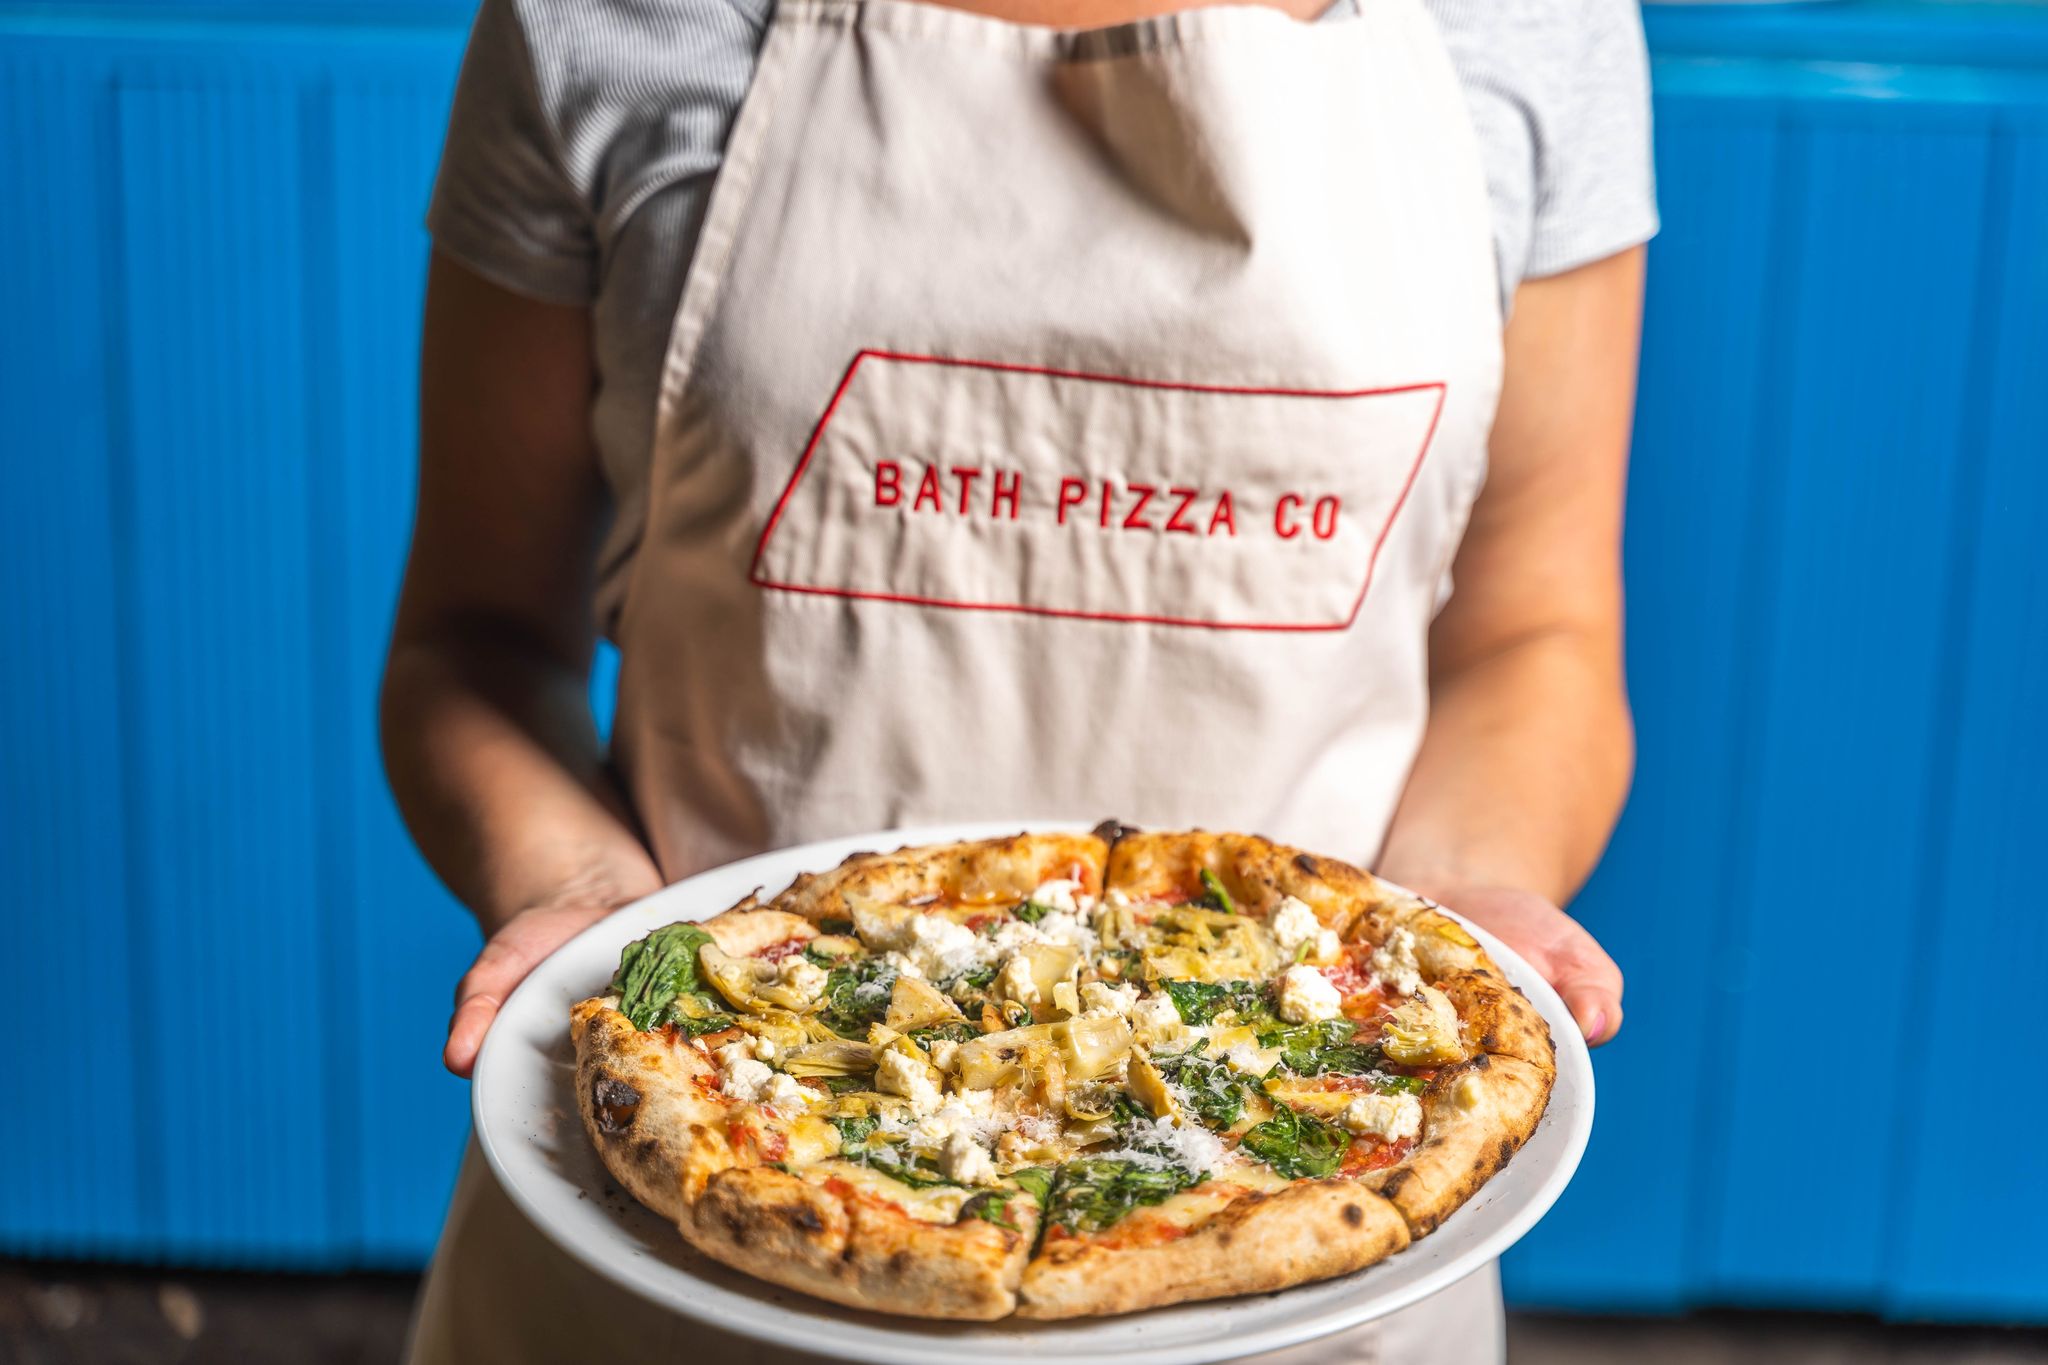 Bath Pizza Co Shortlisted for National Pizza Awards 2021